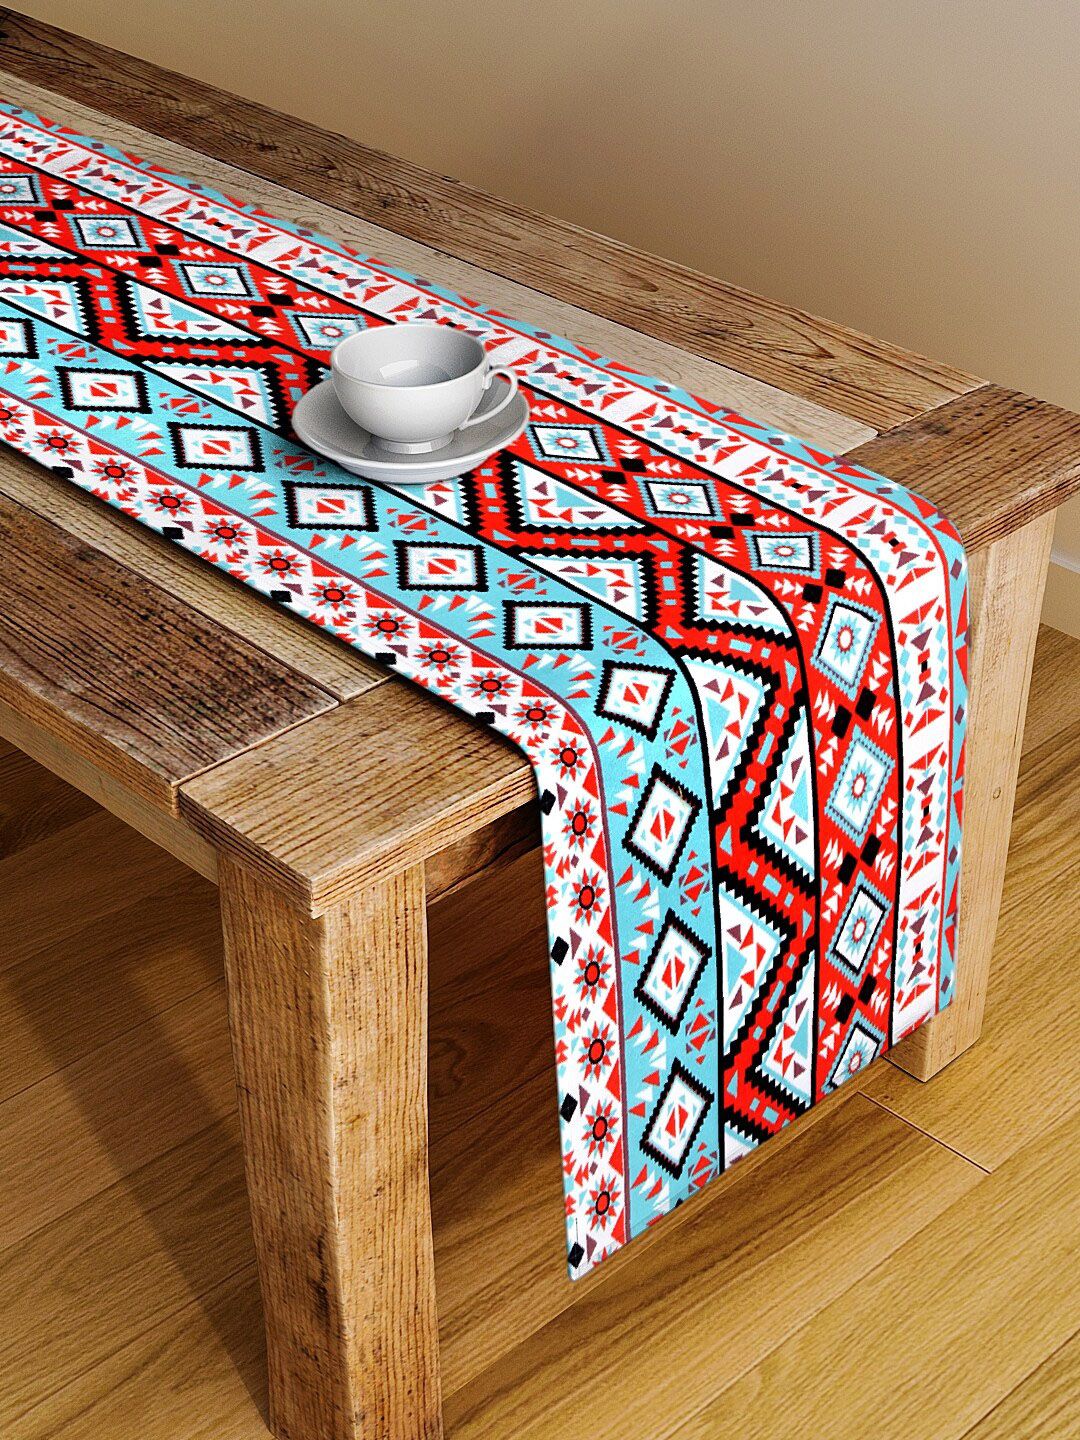 Alina decor Blue & Red Geometric Digital Printed Table Runner Price in India